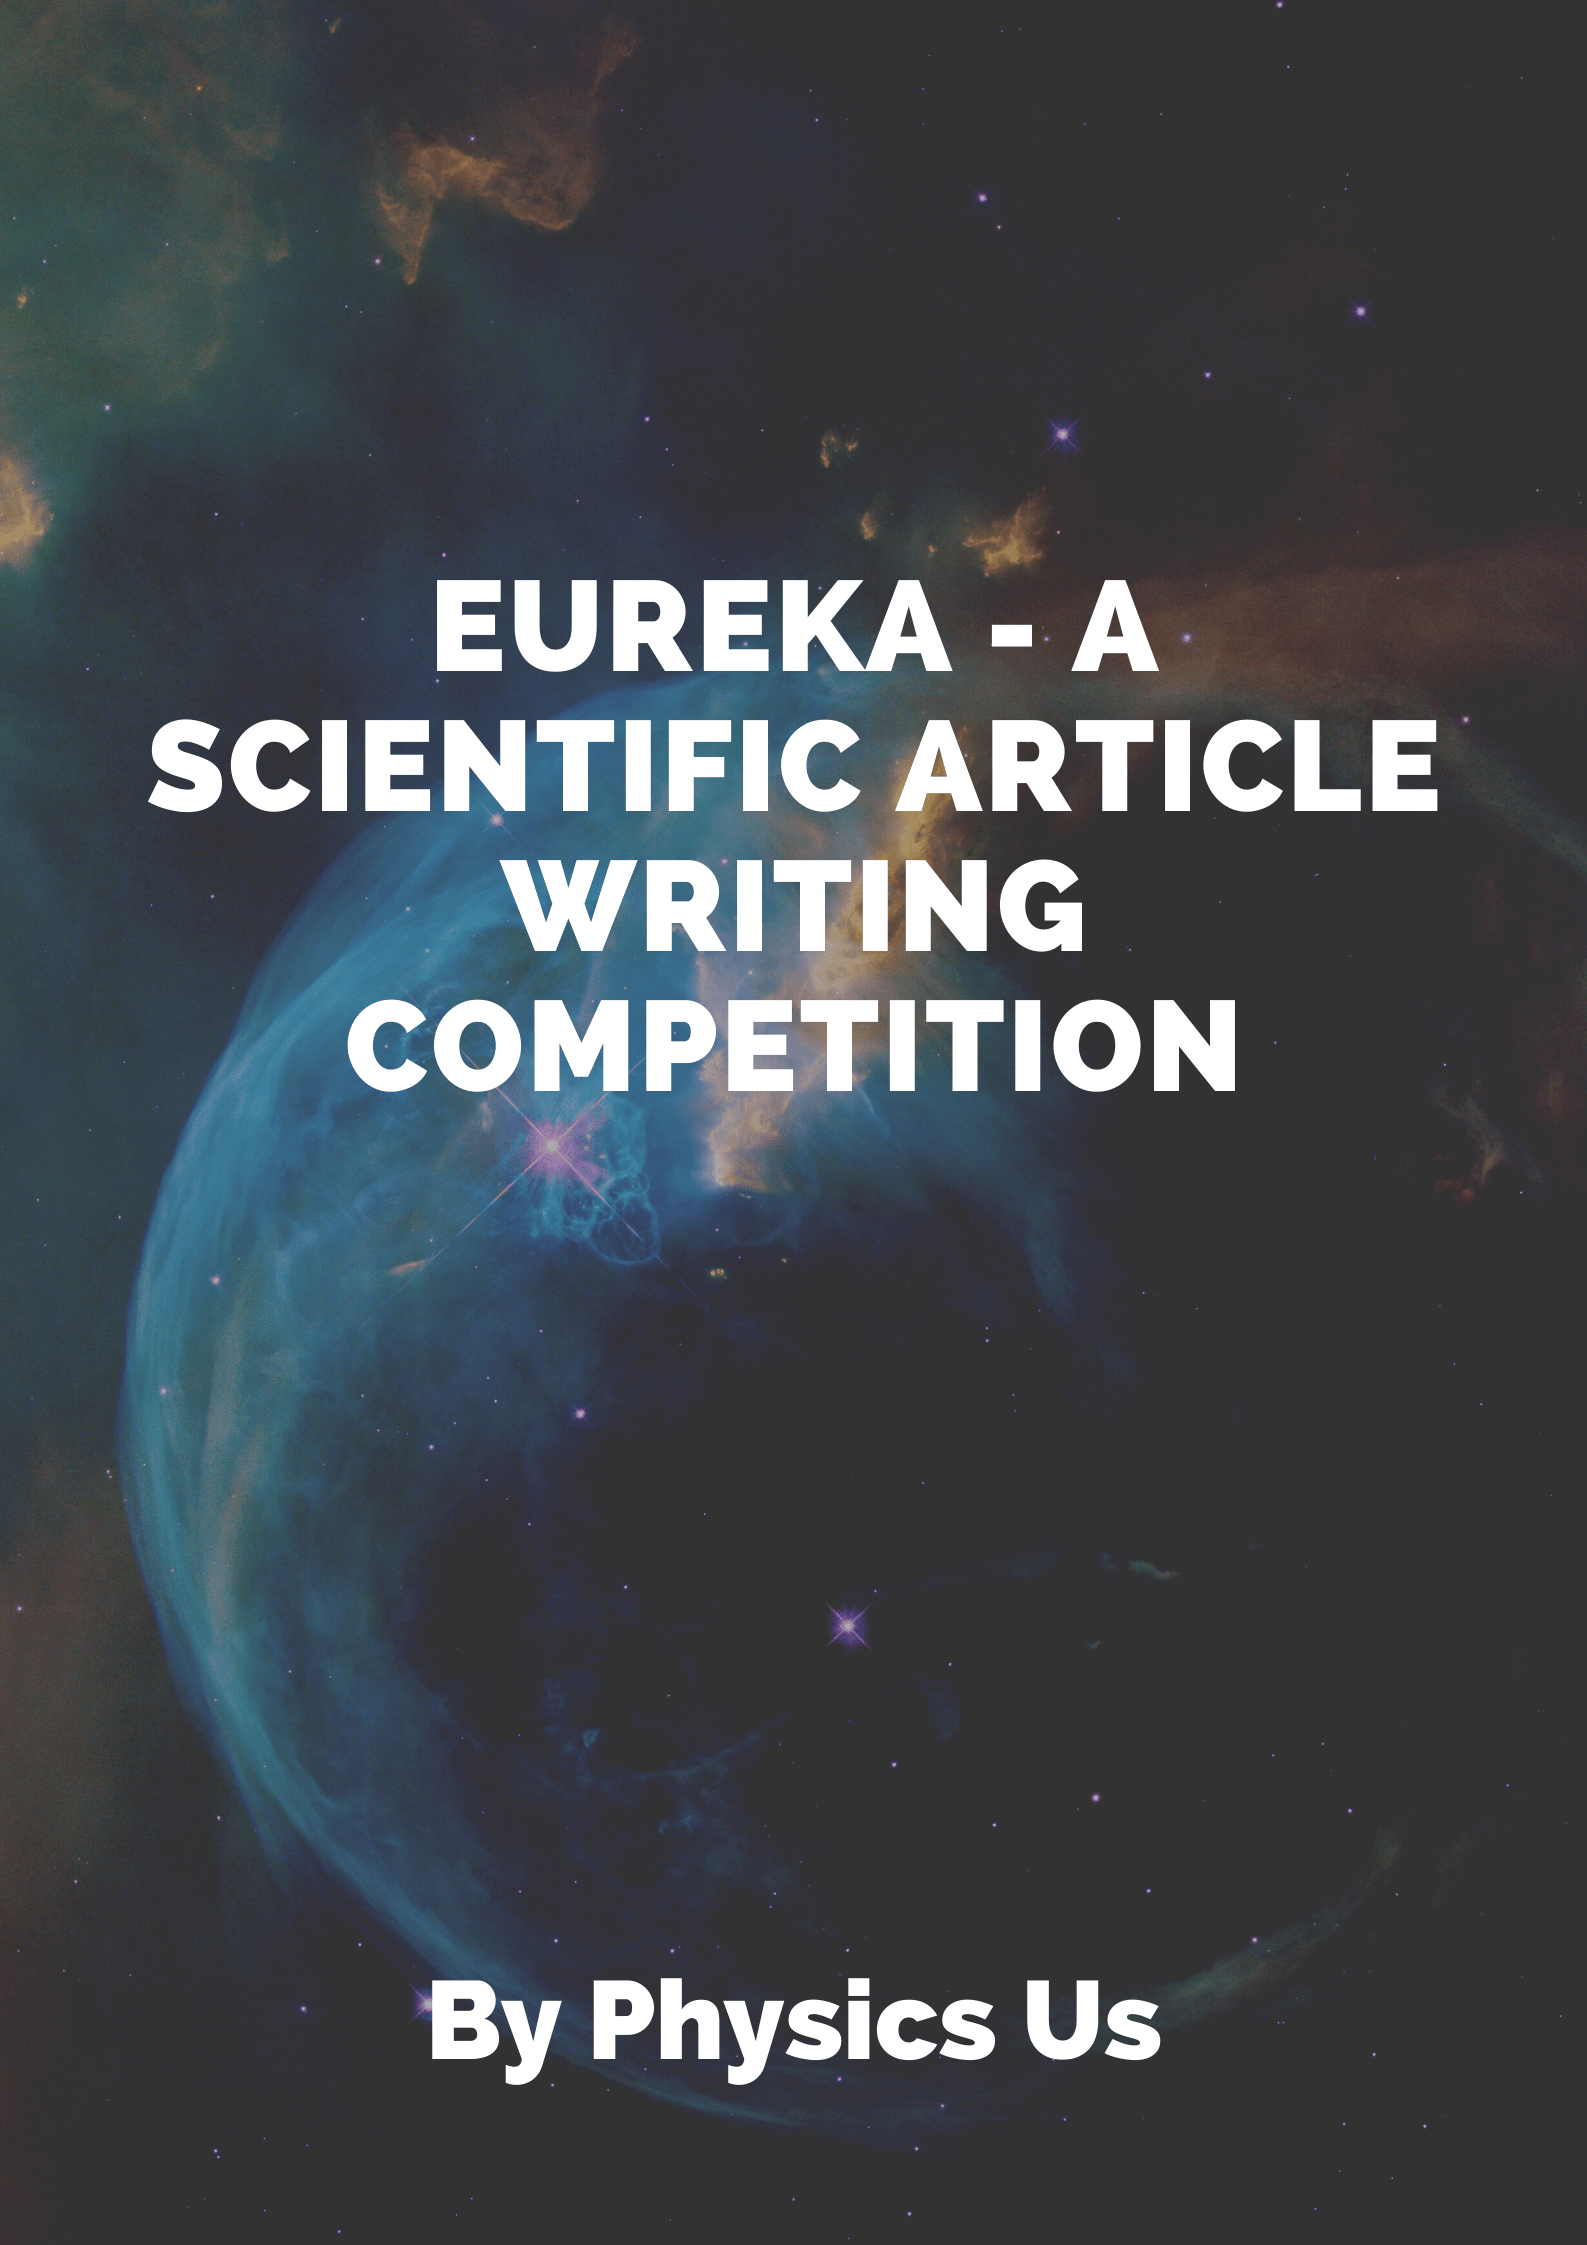 Eureka! - We have our winners